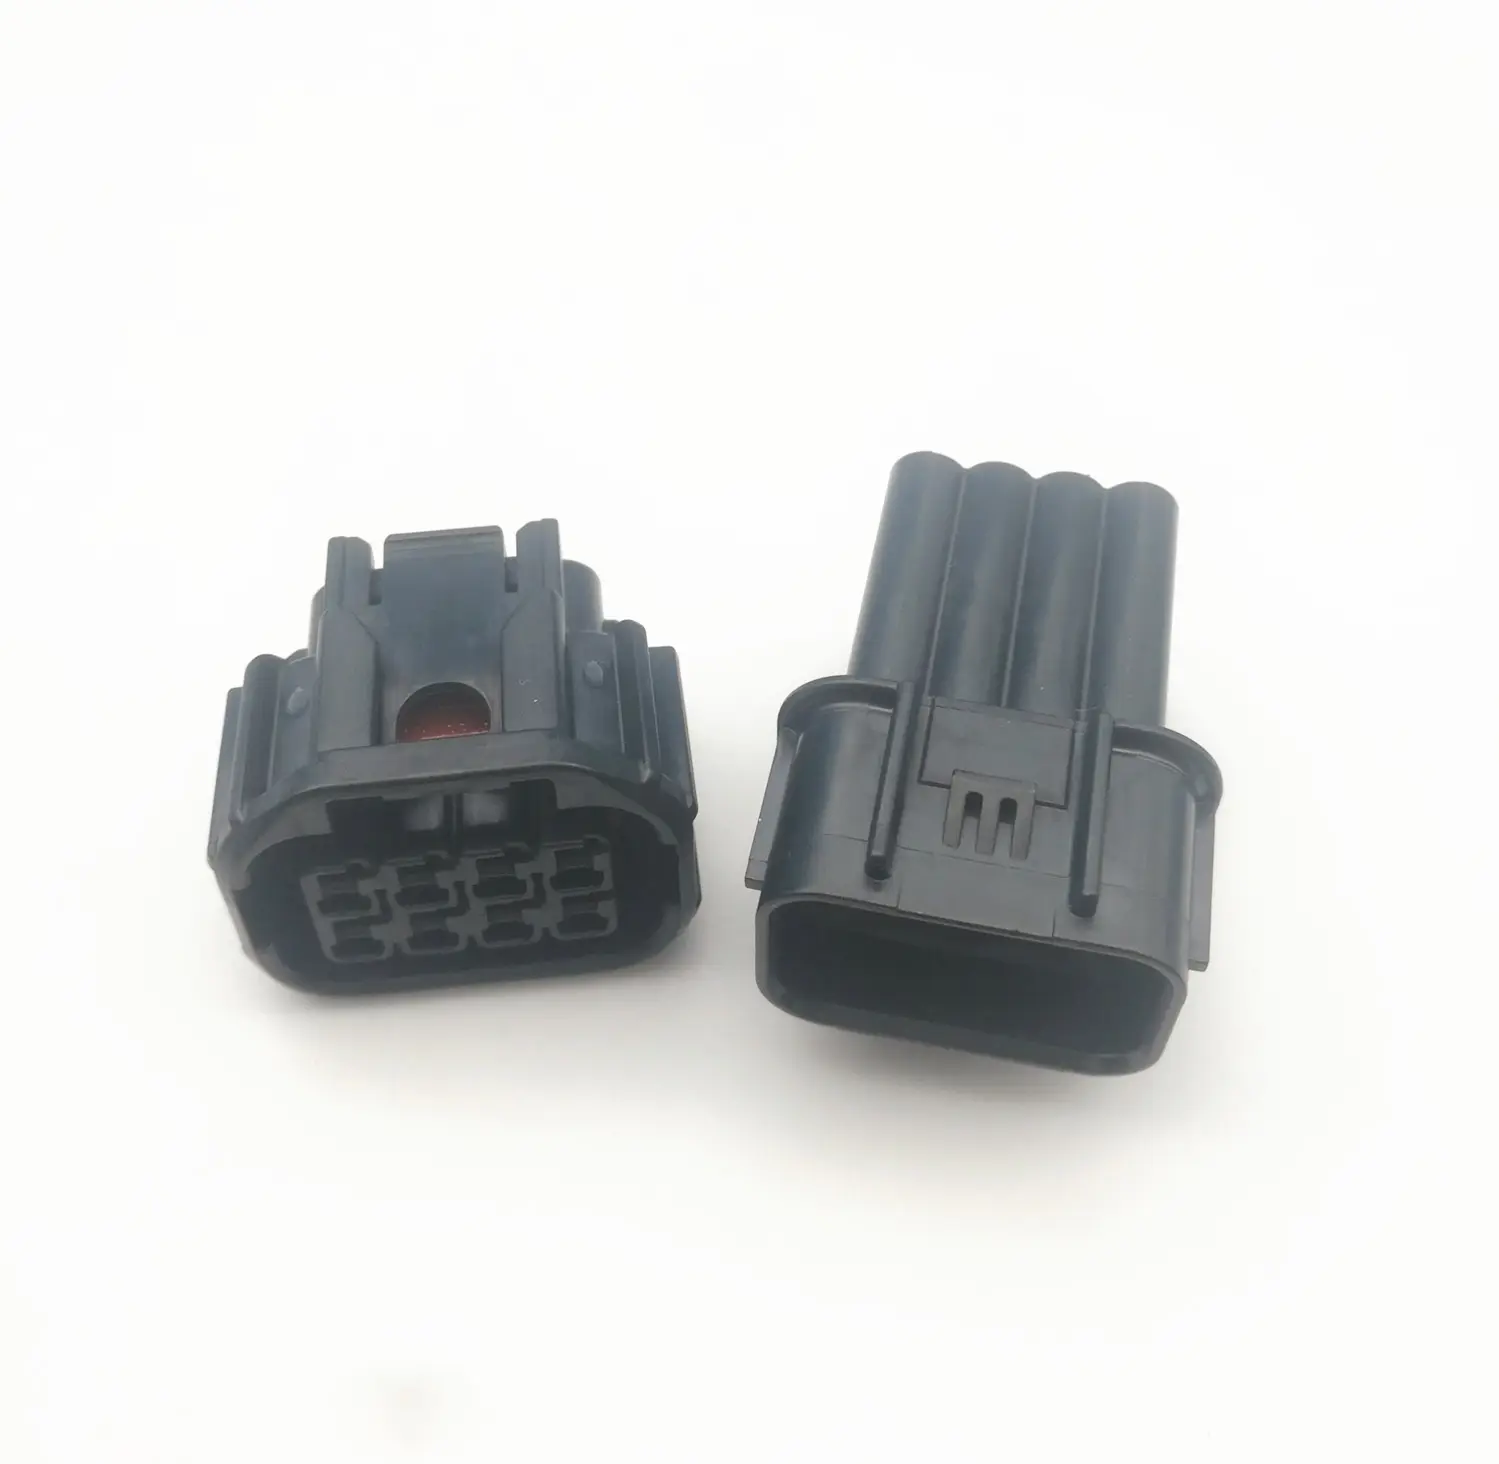 Sumitomo 8 pin female and male waterproof LED headlight speaker plug connector 6189-7423 6181-6850